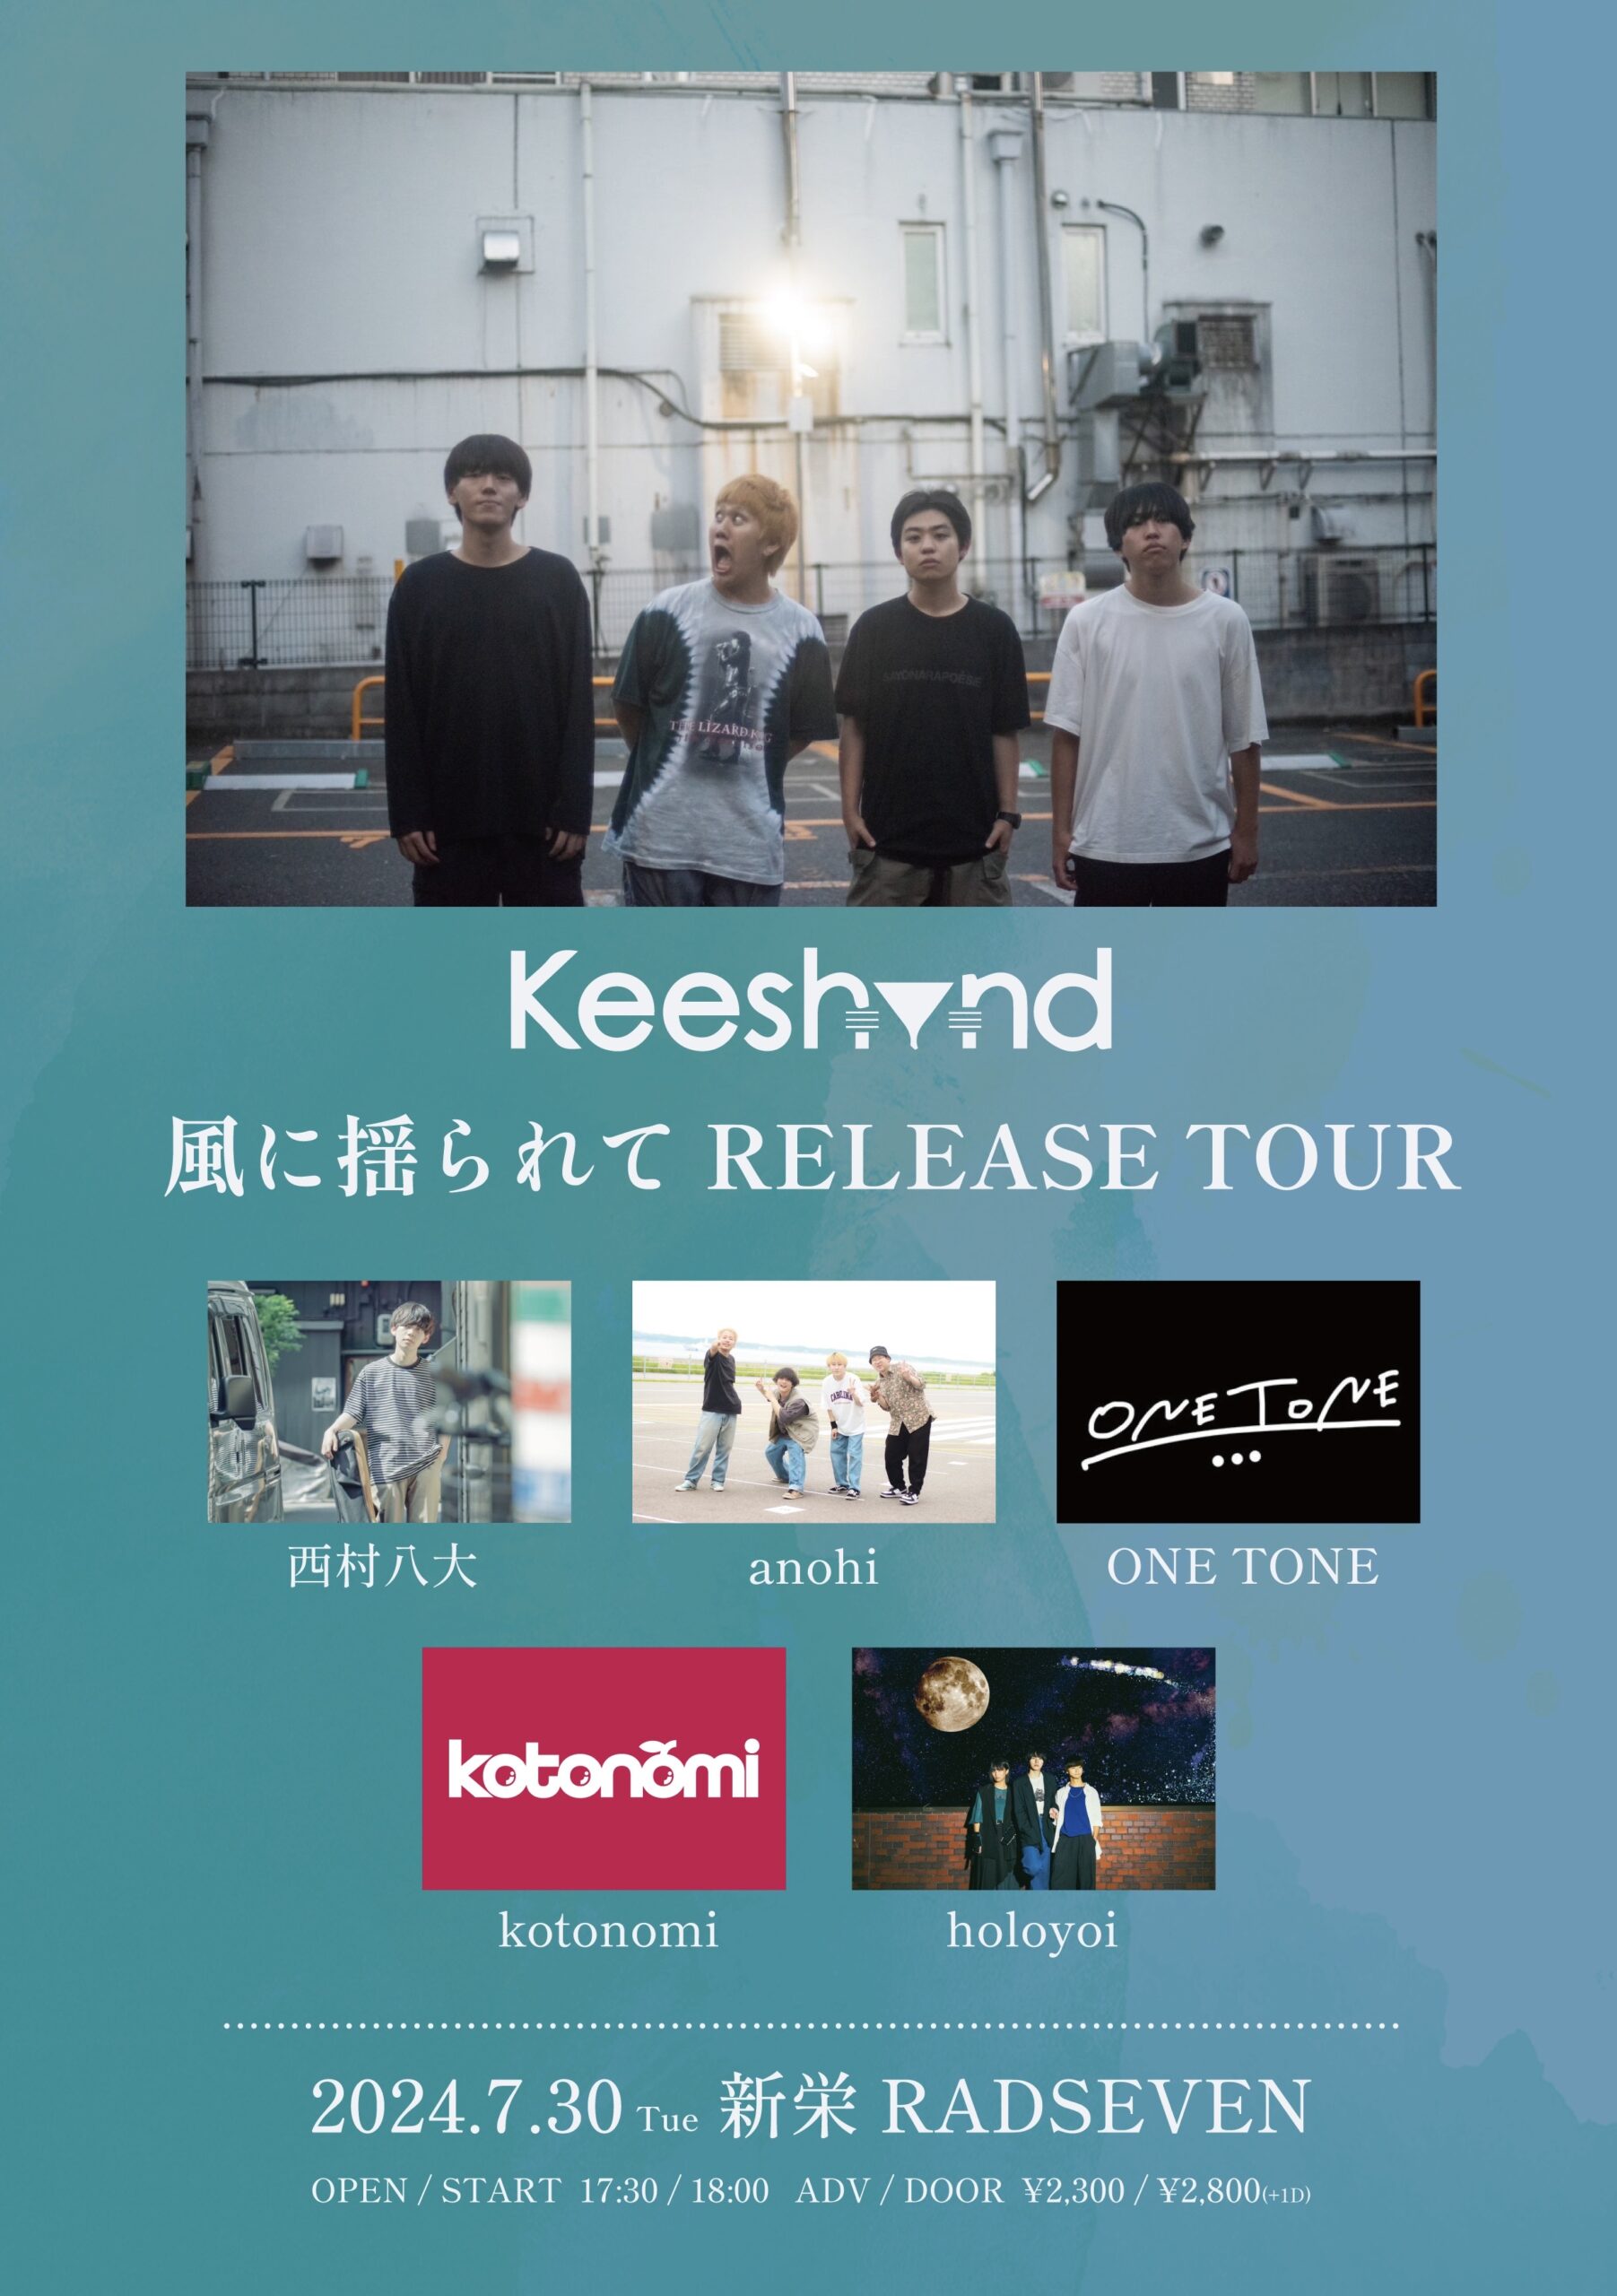 Keeshond 風に揺られて RELEASE TOUR